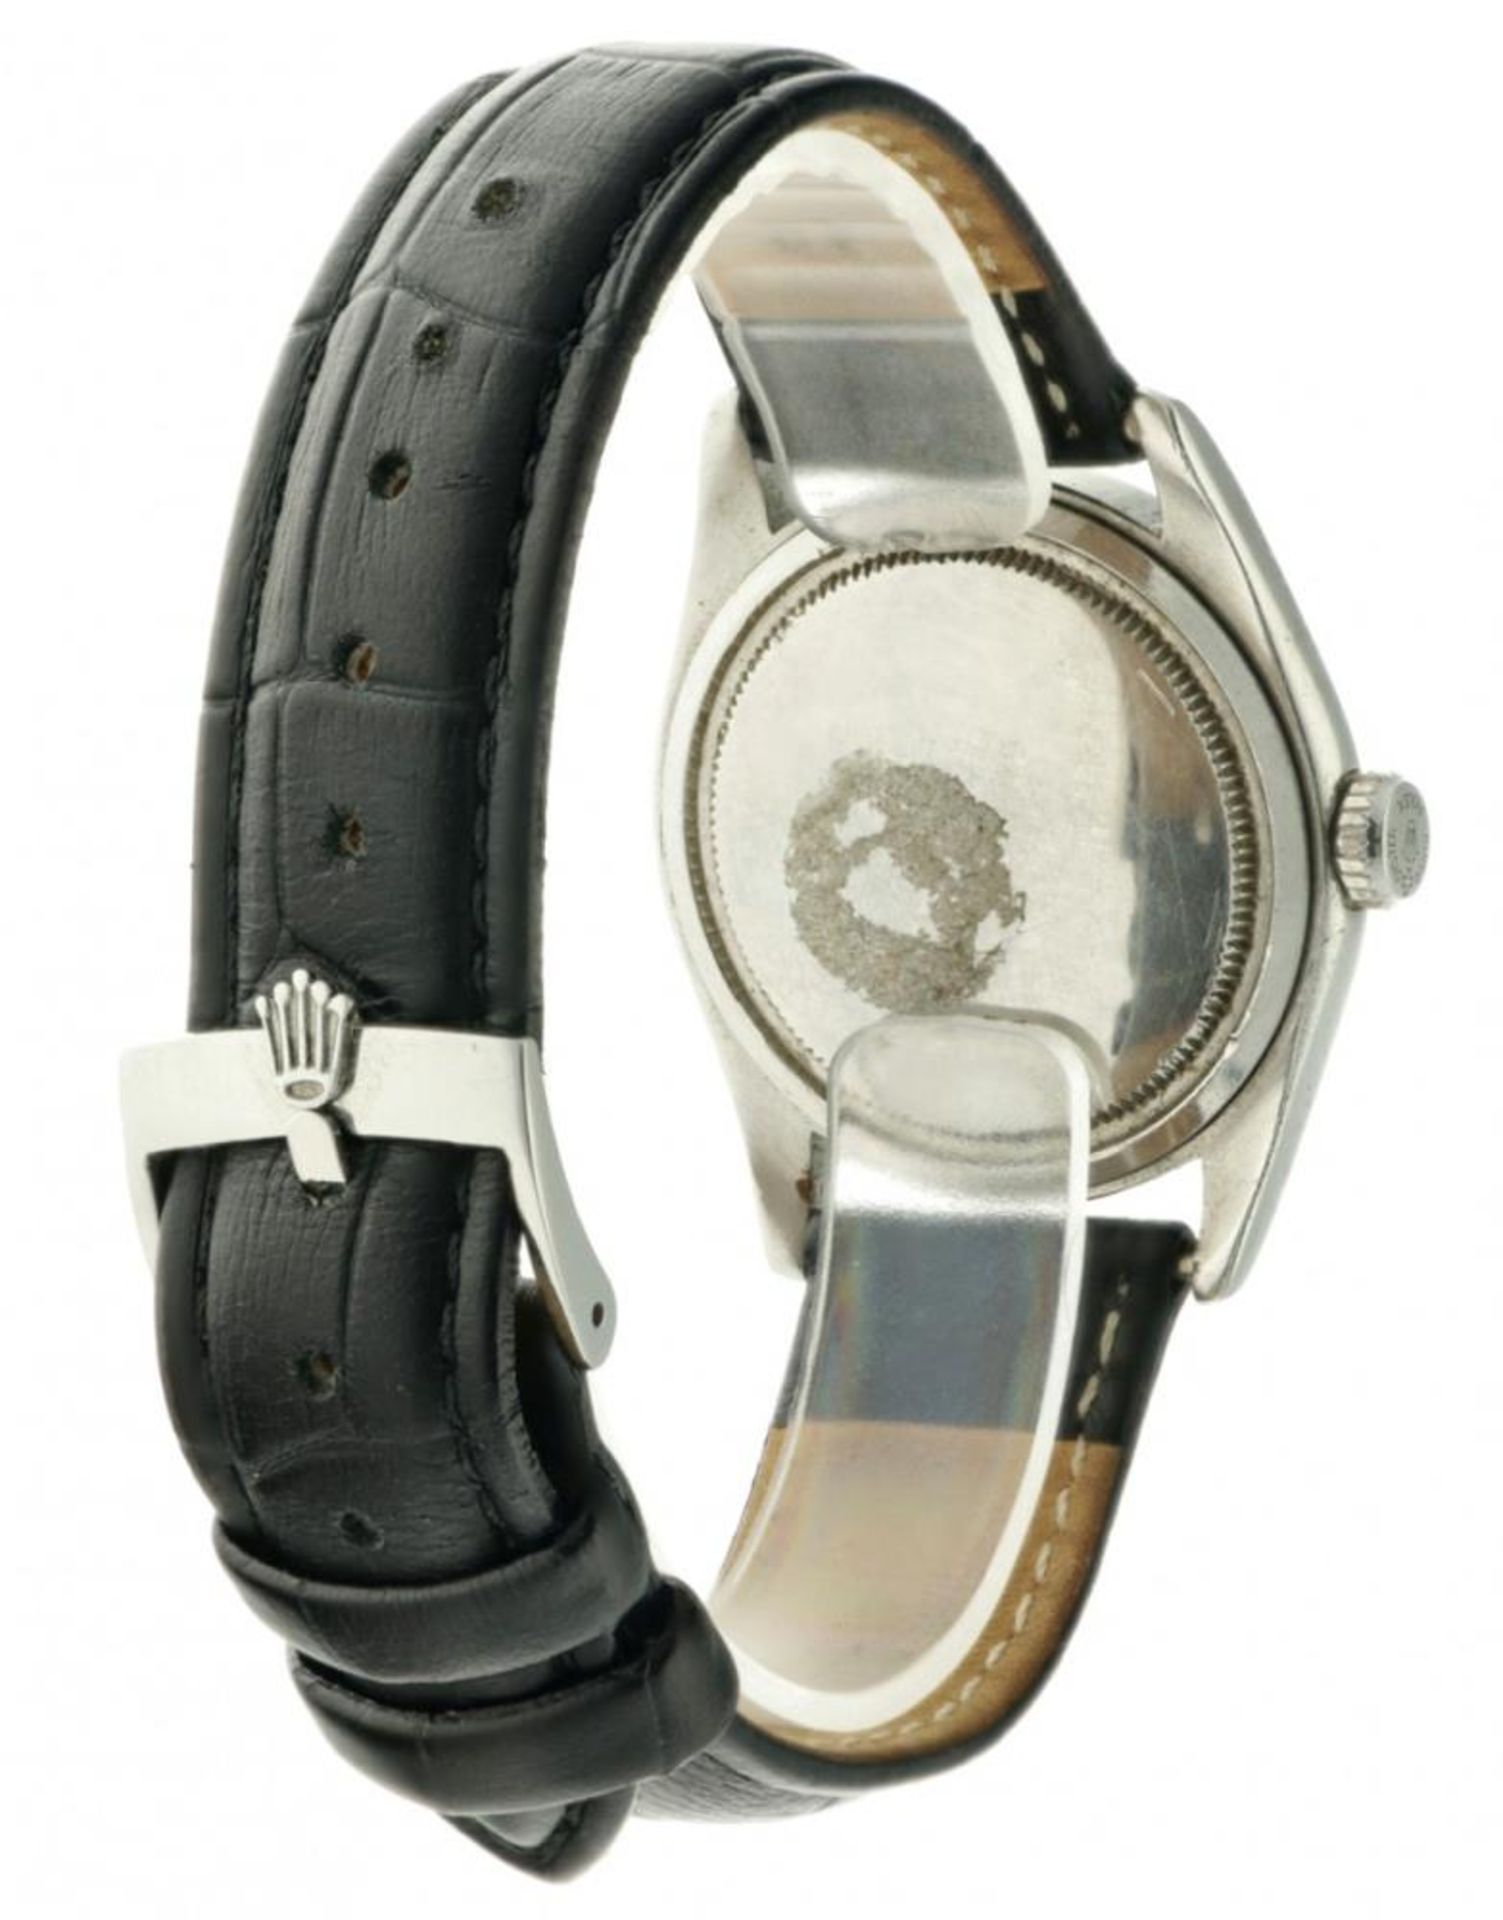 Rolex Oyster Precision 6082 - Men's watch - apprx. 1950. - Image 3 of 7